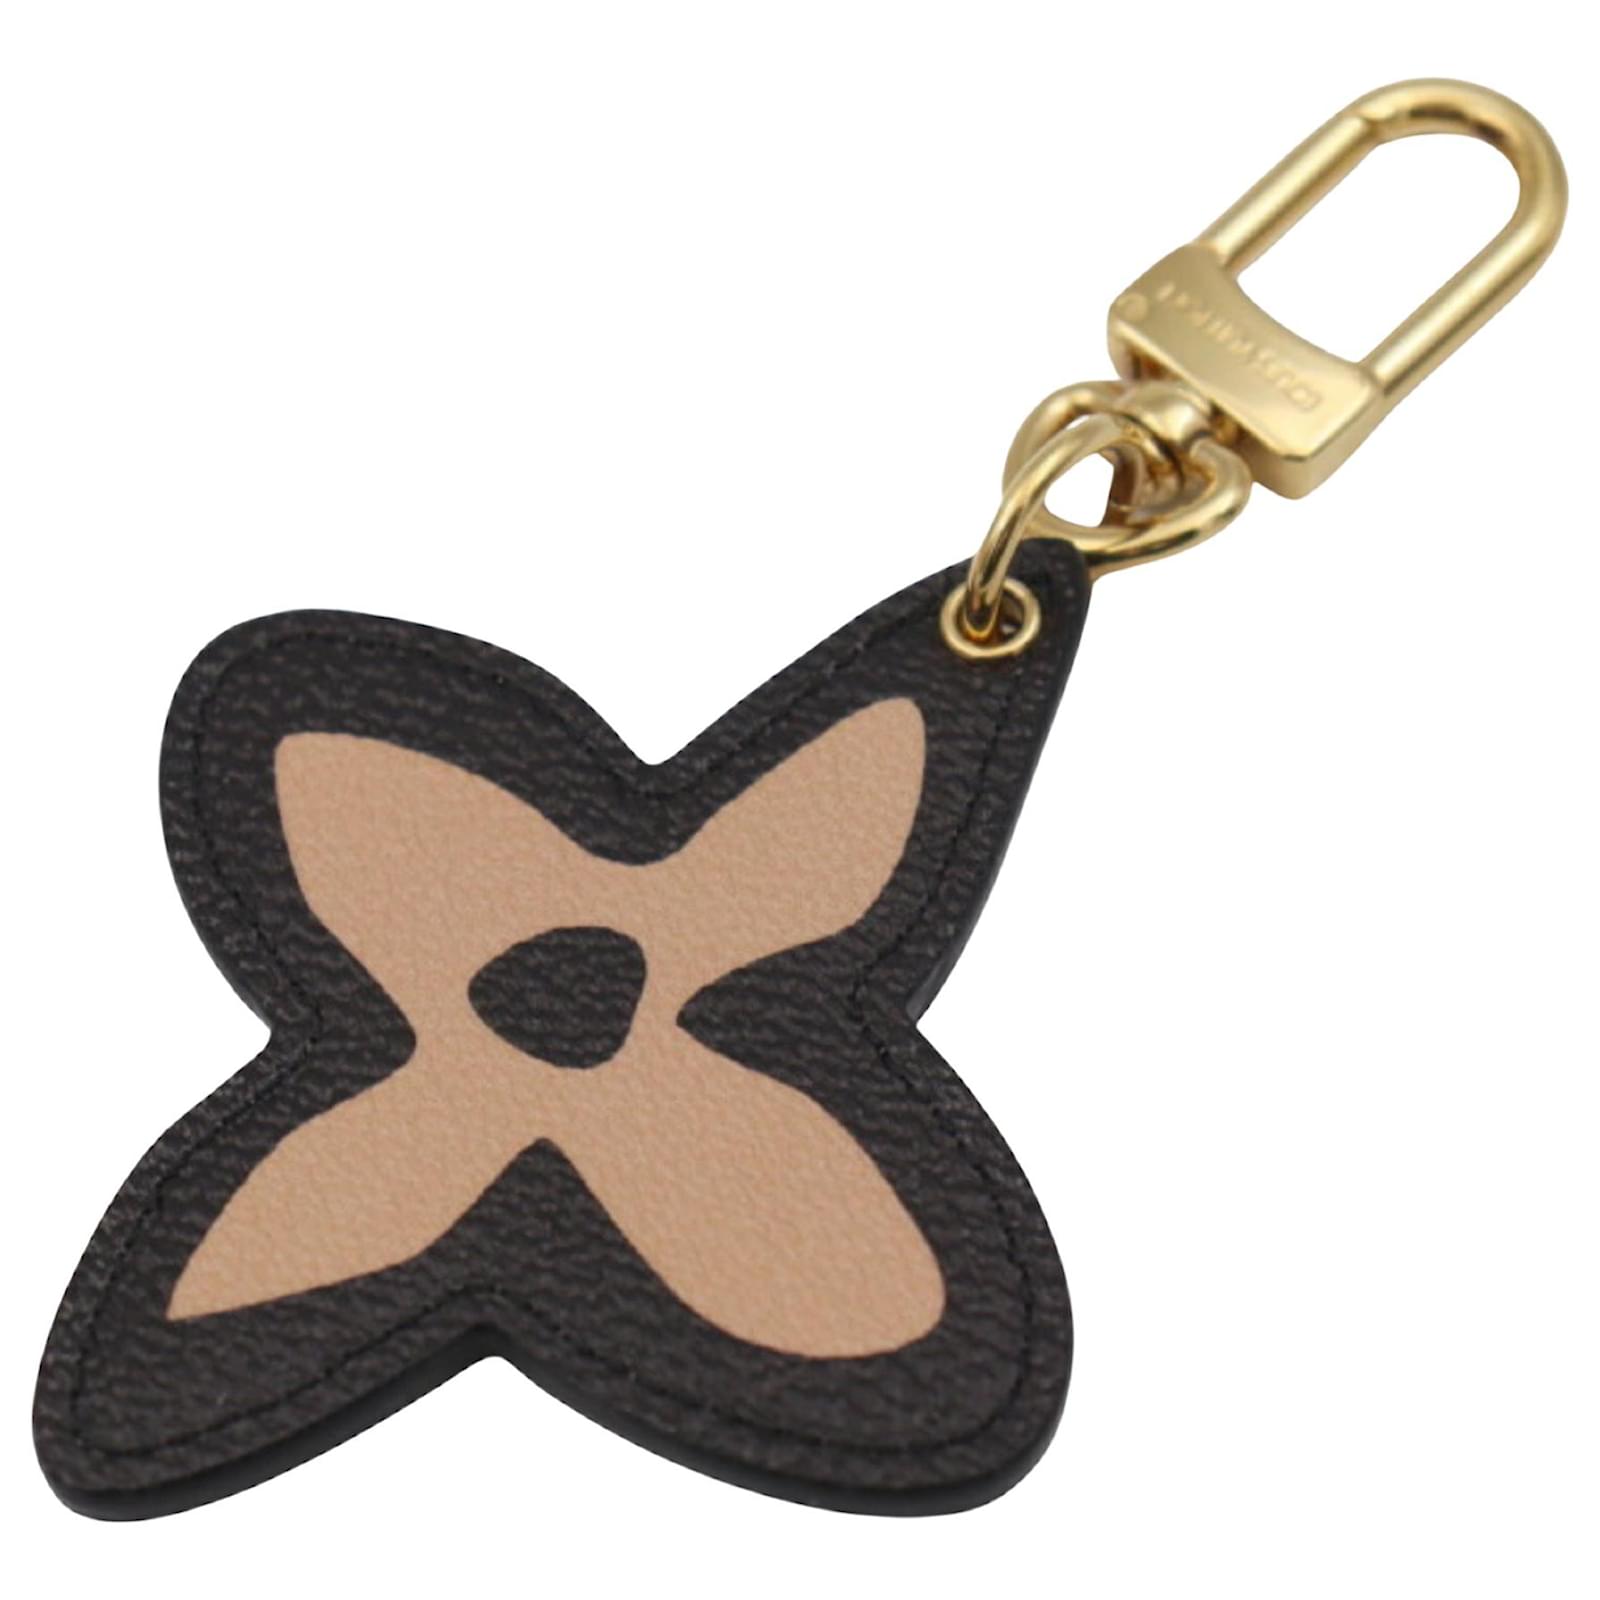 Louis Vuitton Gold, Metallic, Pattern Print Insolence Key Holder and Bag Charm